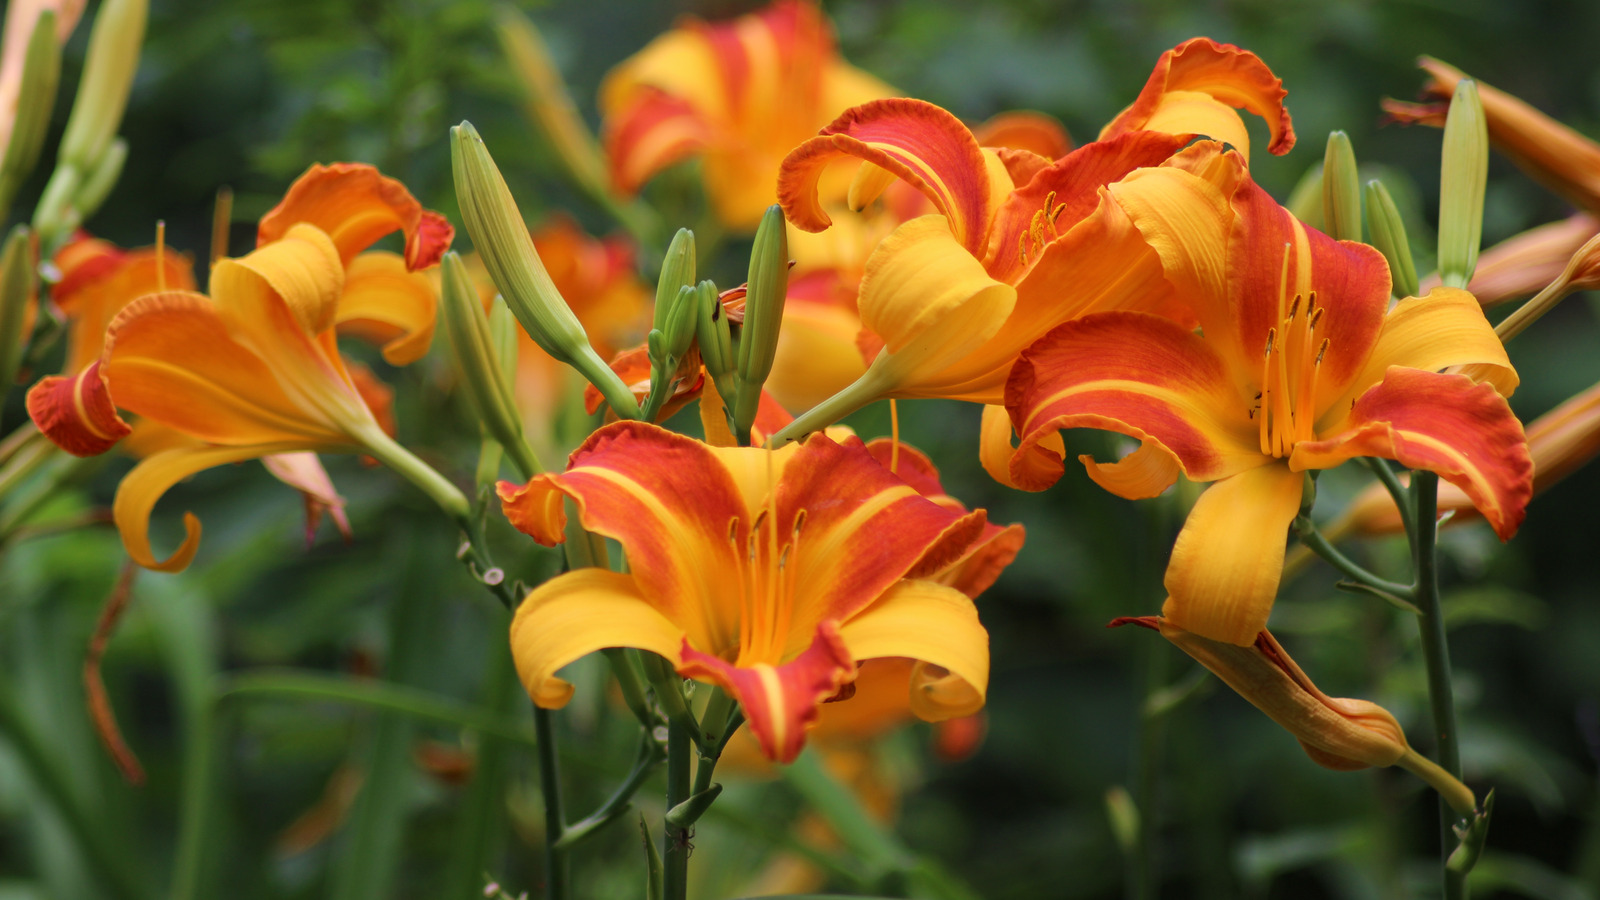 What Are Ditch Lilies, And Why Are They So Controversial?